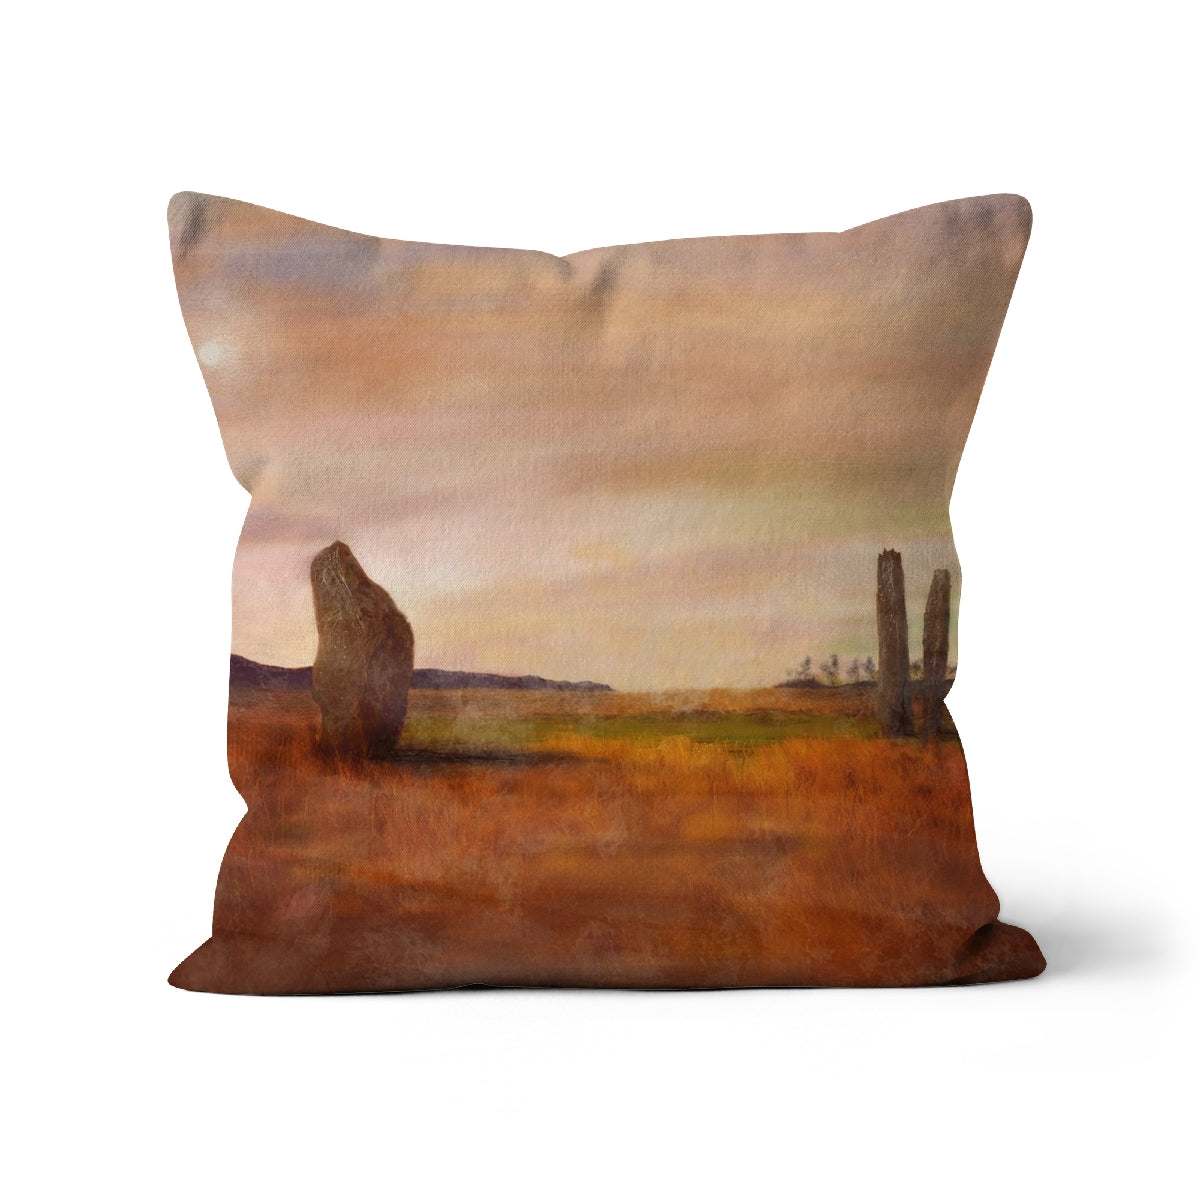 Machrie Moor Arran Art Gifts Cushion-Cushions-Arran Art Gallery-Canvas-24"x24"-Paintings, Prints, Homeware, Art Gifts From Scotland By Scottish Artist Kevin Hunter